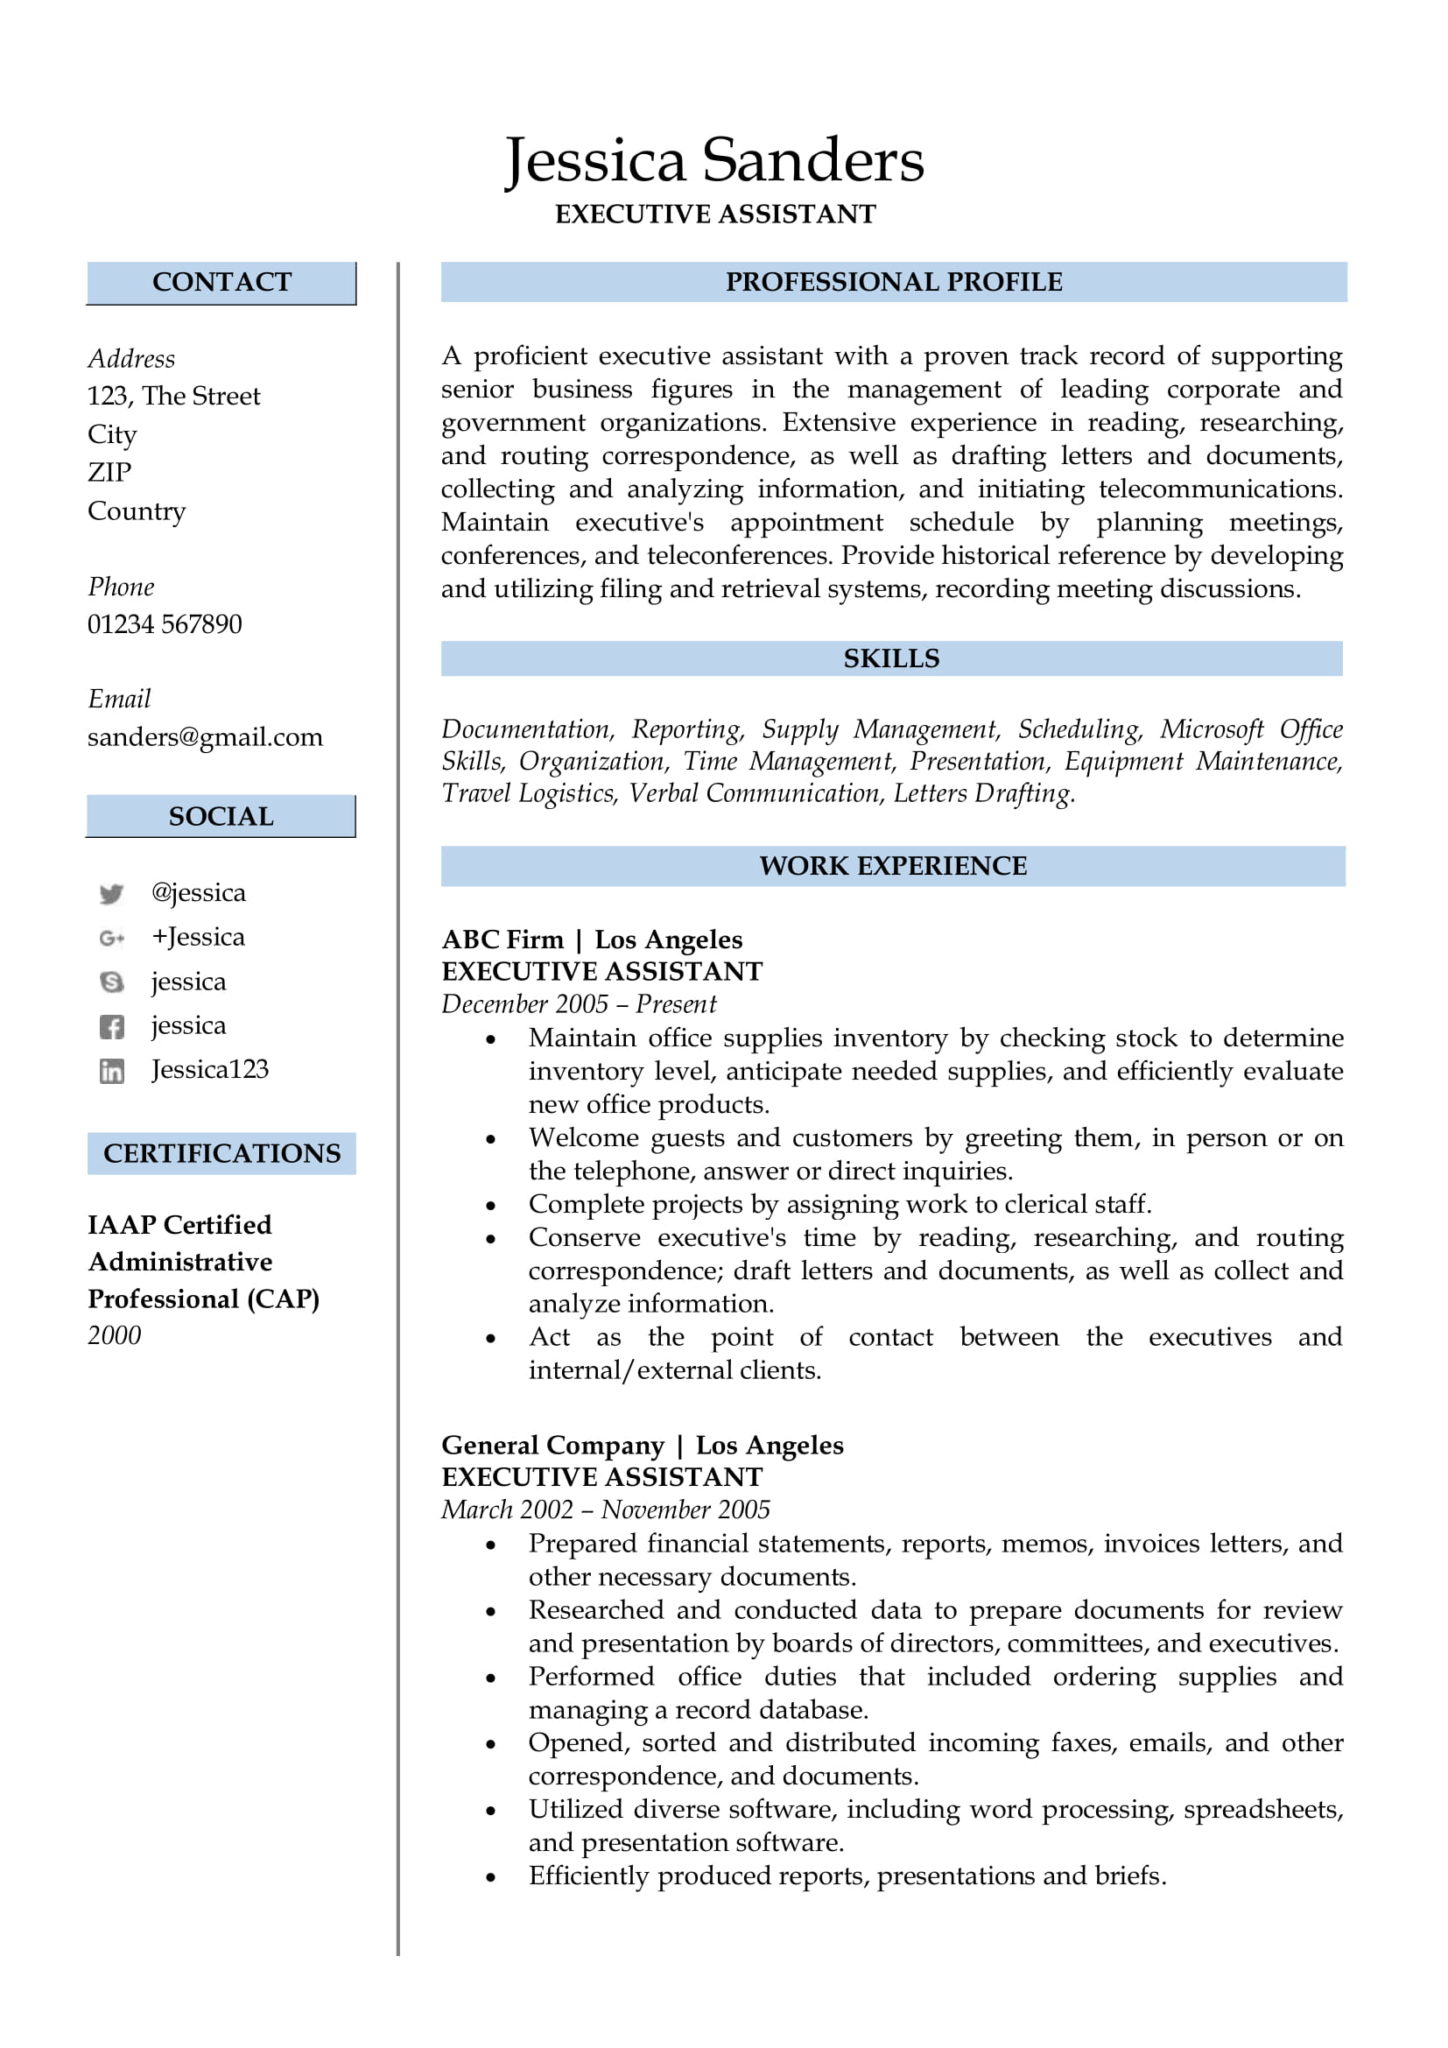 10 Best Information Technology Resume Services () - Find My Profession